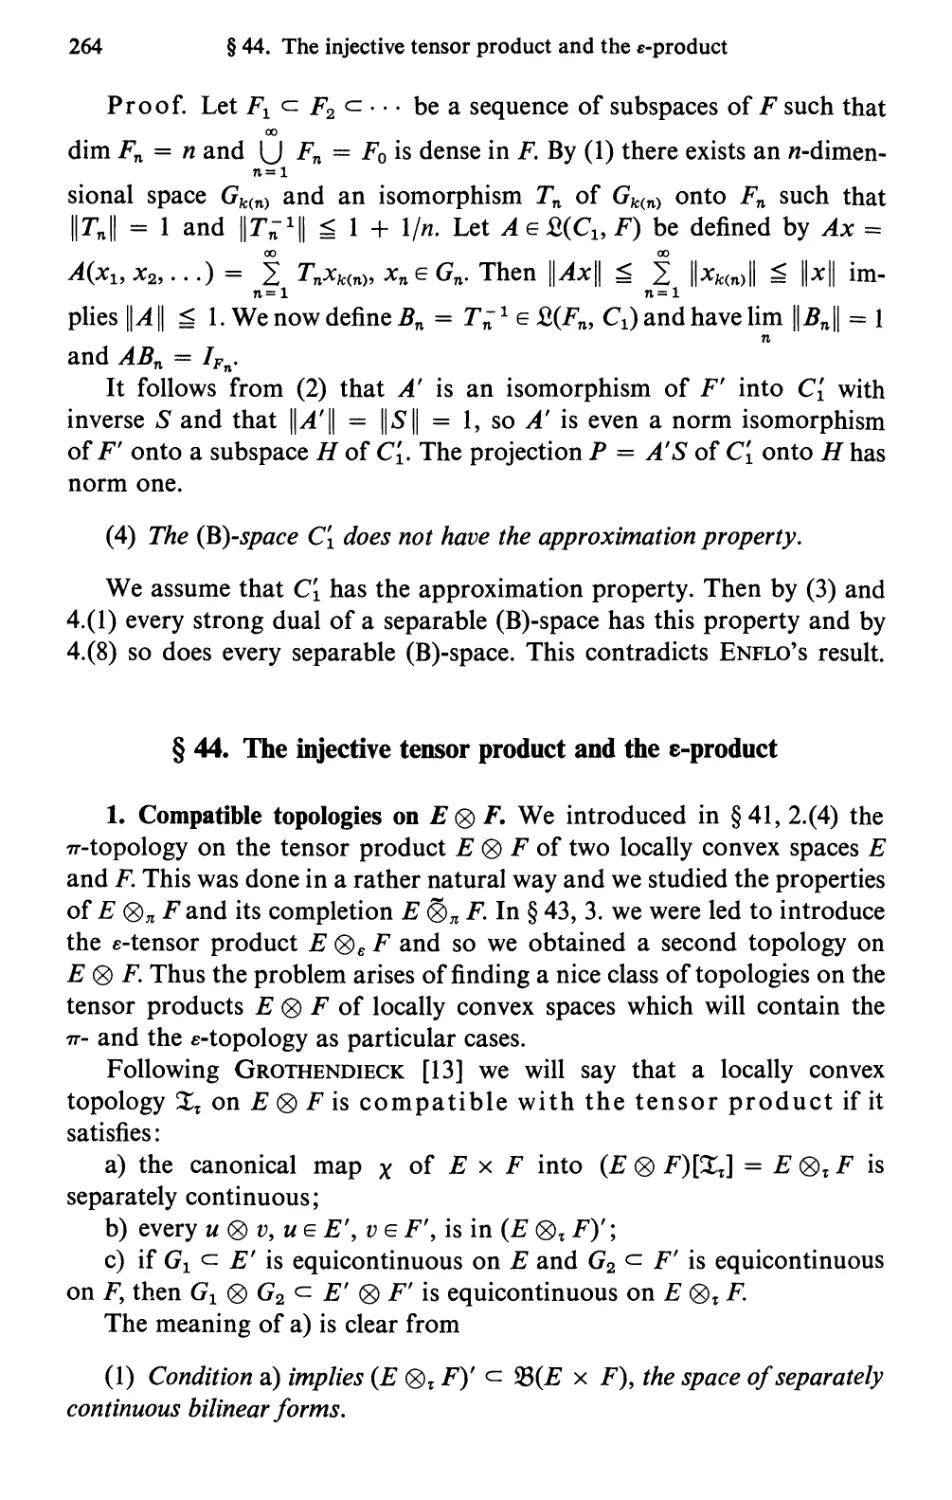 §44. The injective tensor product and the e-product